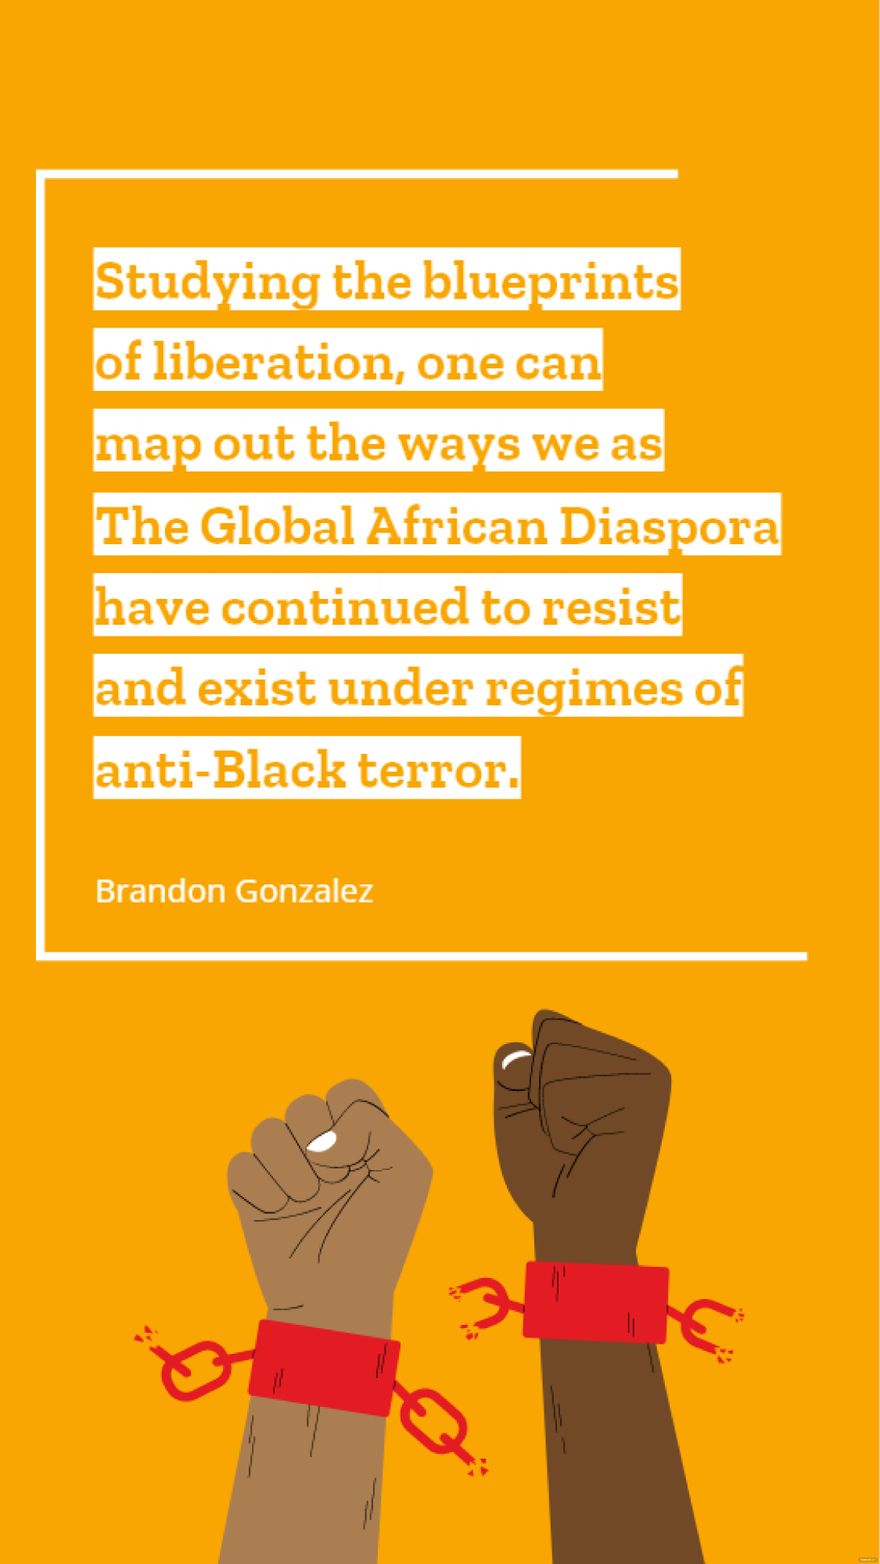 Brandon Gonzalez - Studying the blueprints of liberation, one can map out the ways we as The Global African Diaspora have continued to resist and exist under regimes of anti-Black terror.